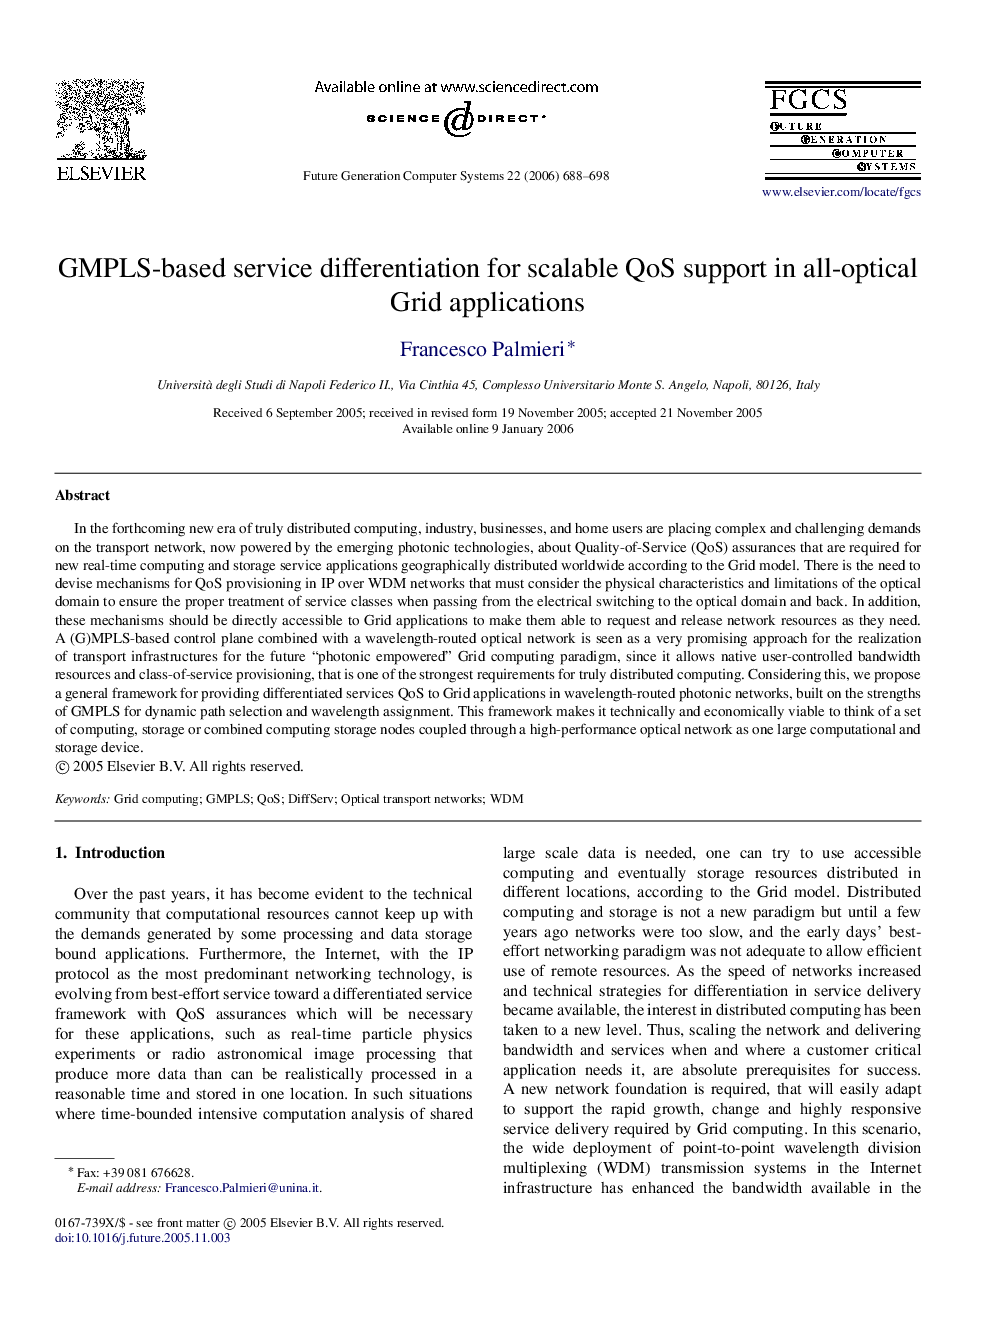 GMPLS-based service differentiation for scalable QoS support in all-optical Grid applications